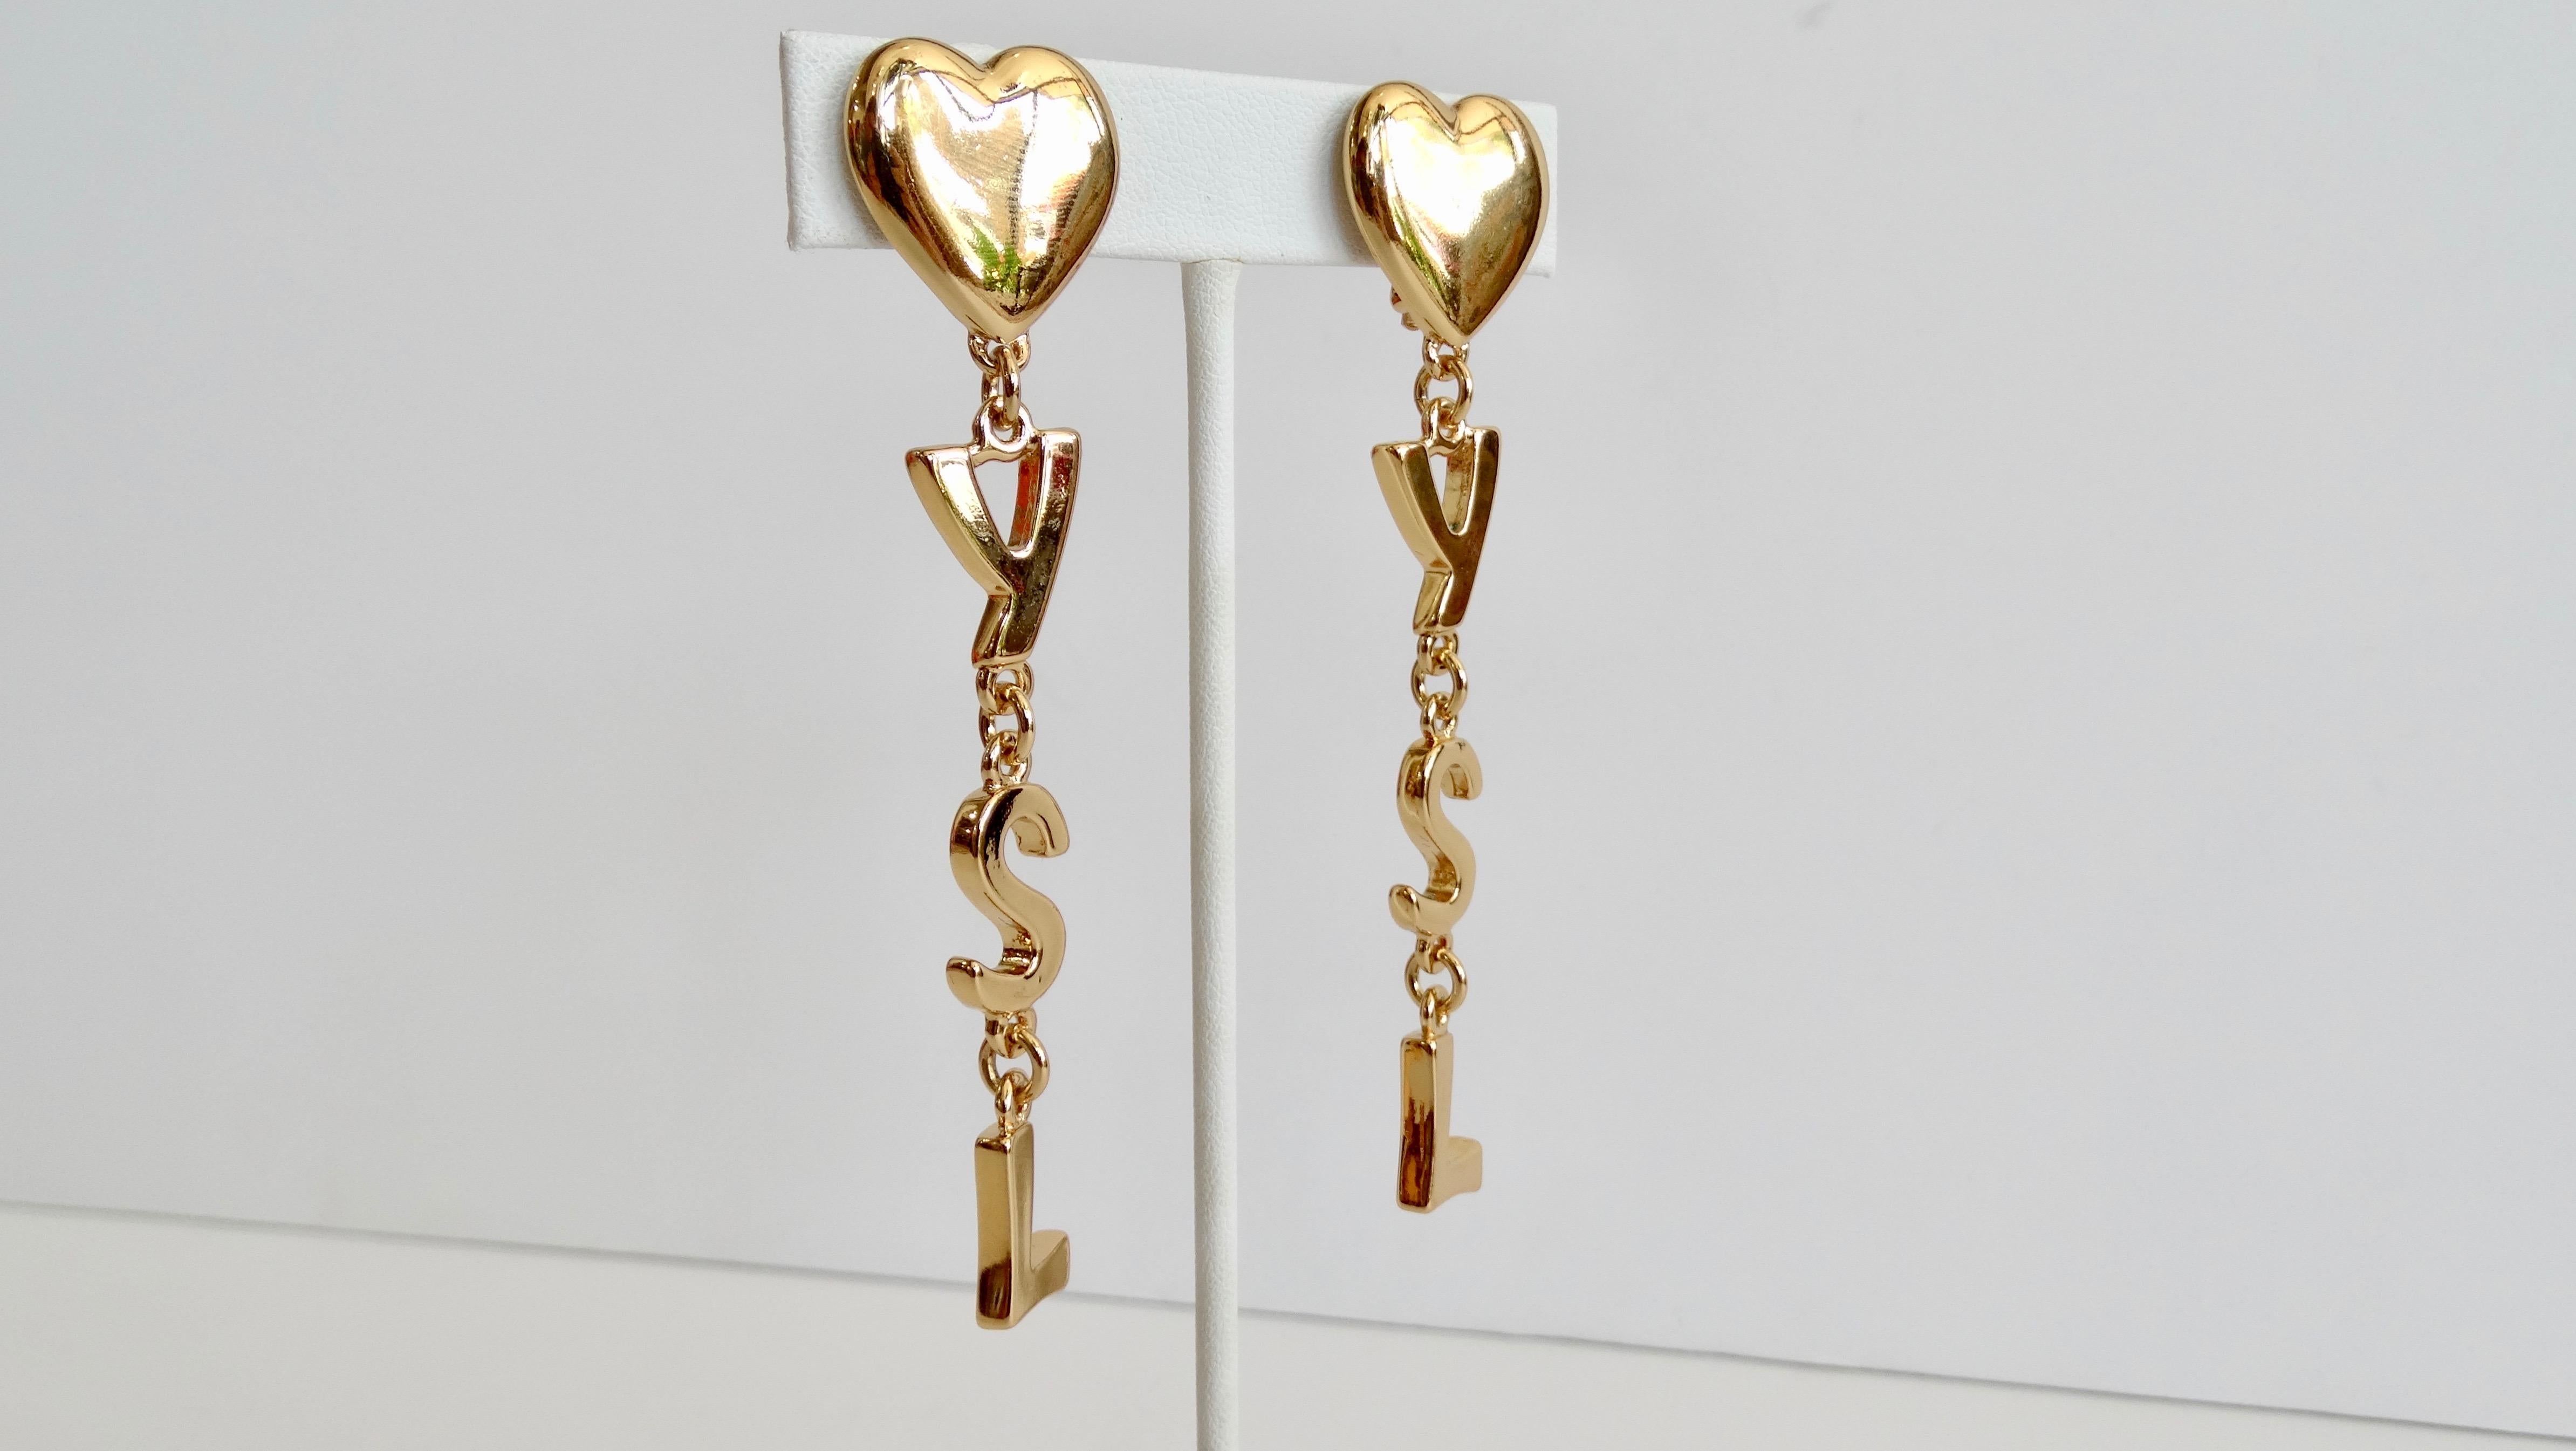 No one does eye candy like Yves Saint Laurent! Circa 1980s, these gold plated dangle earrings feature the iconic 